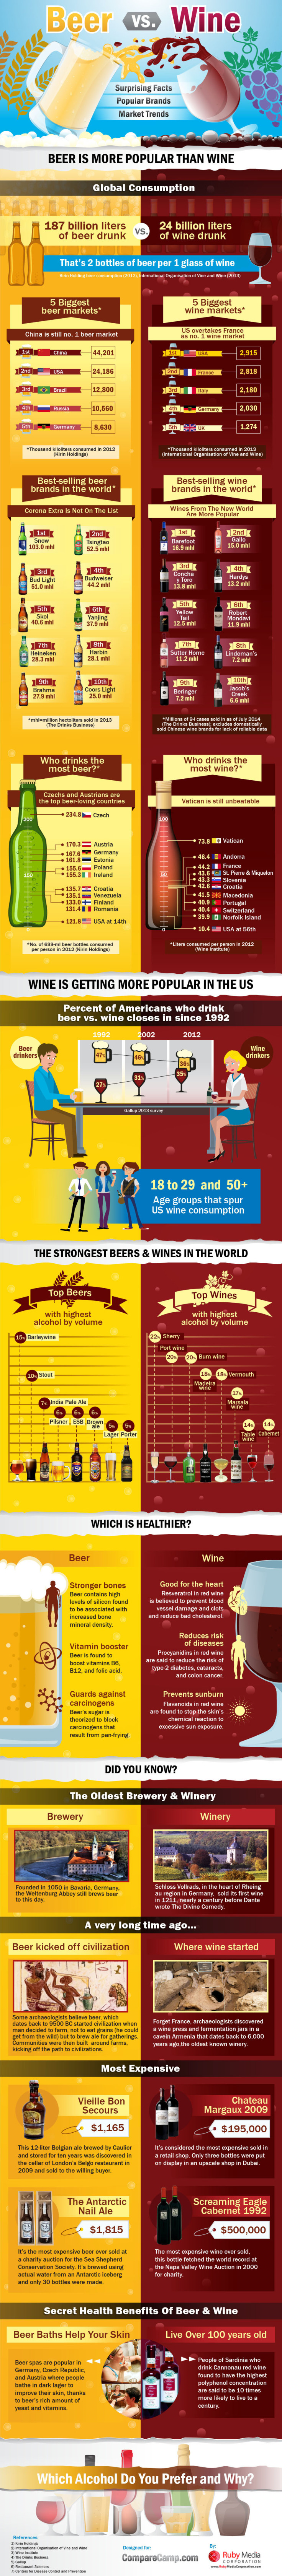 Interesting Facts About Beer And Wine: Trivia, Market Trends & Industry Statistics